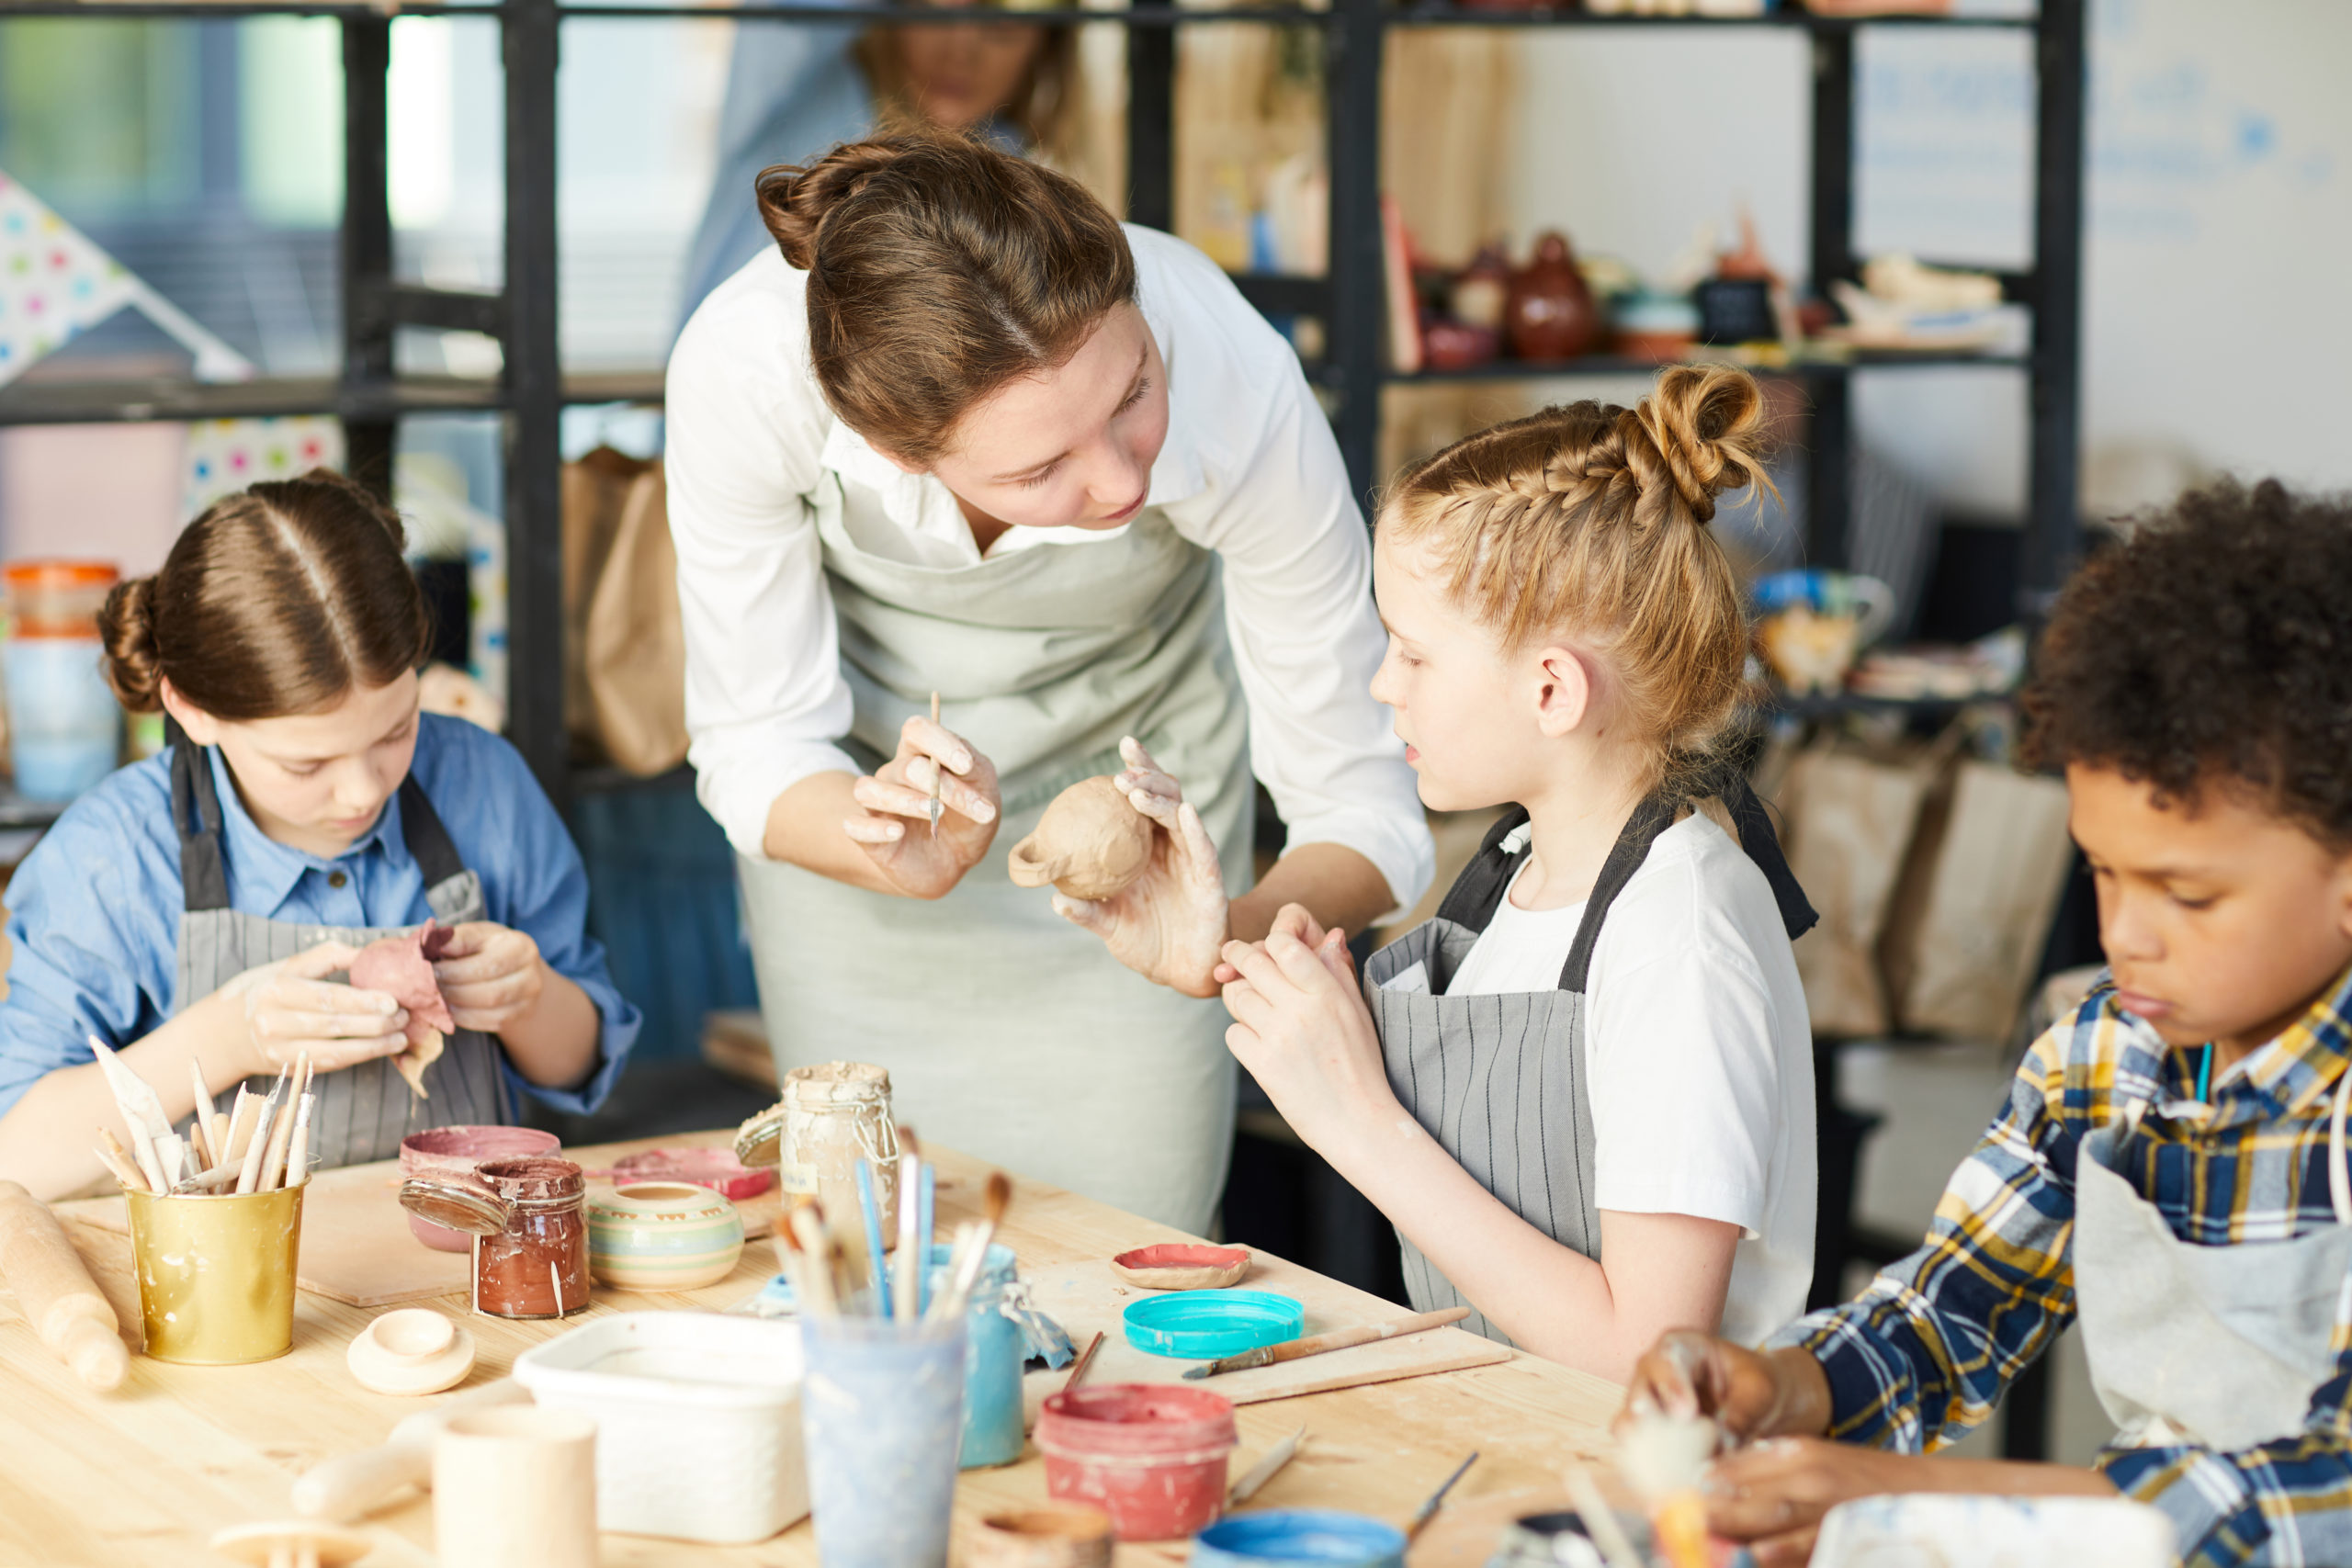 children painting workshop as a fundraising idea